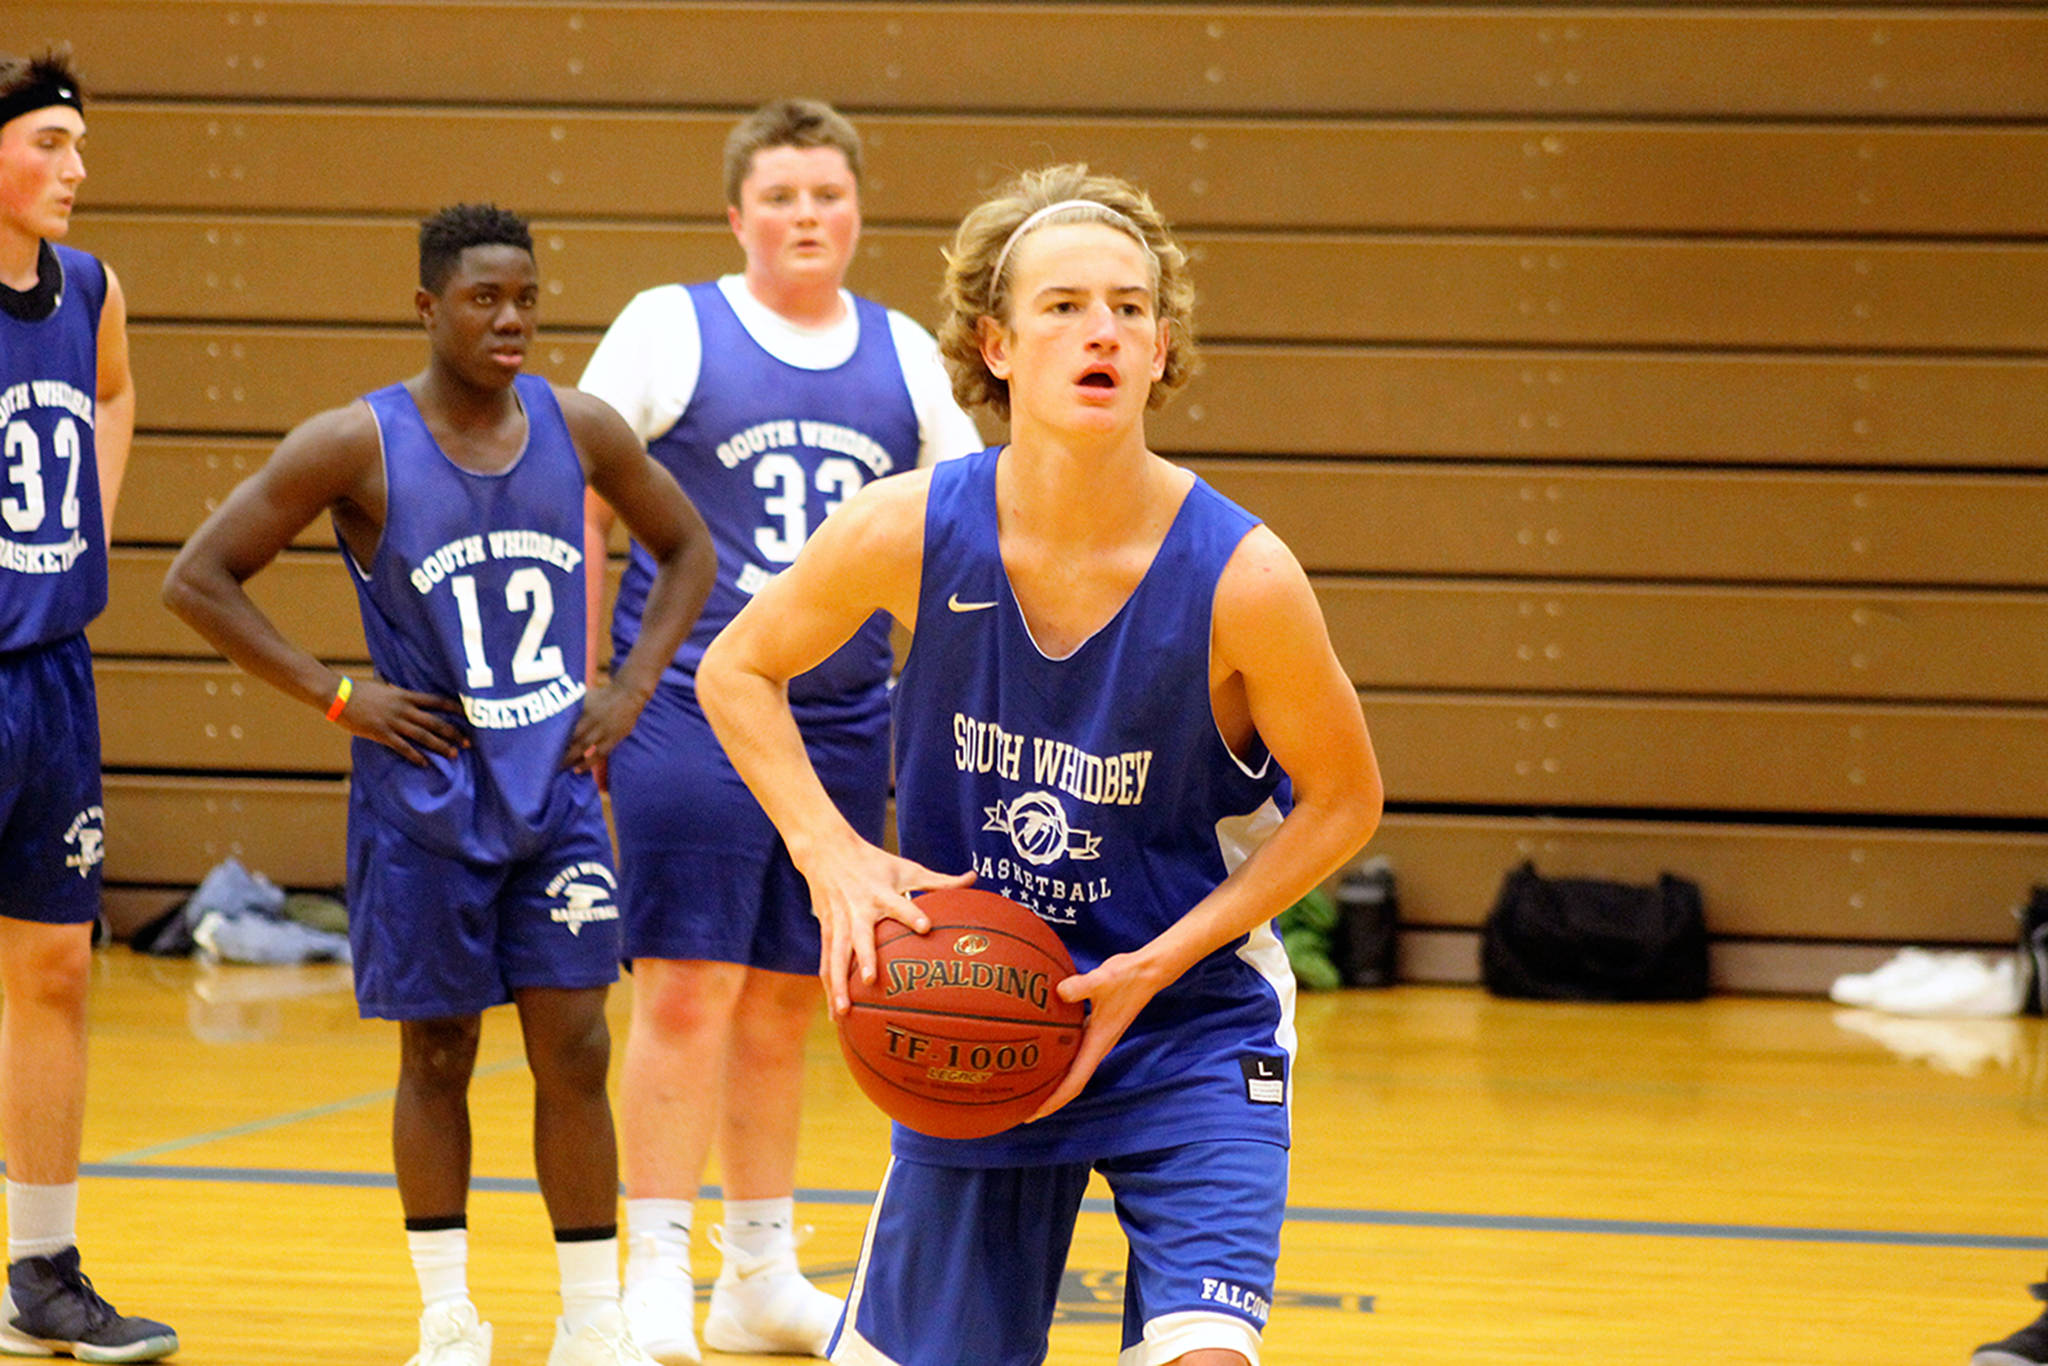 Youth could make or break season for South Whidbey boys hoops